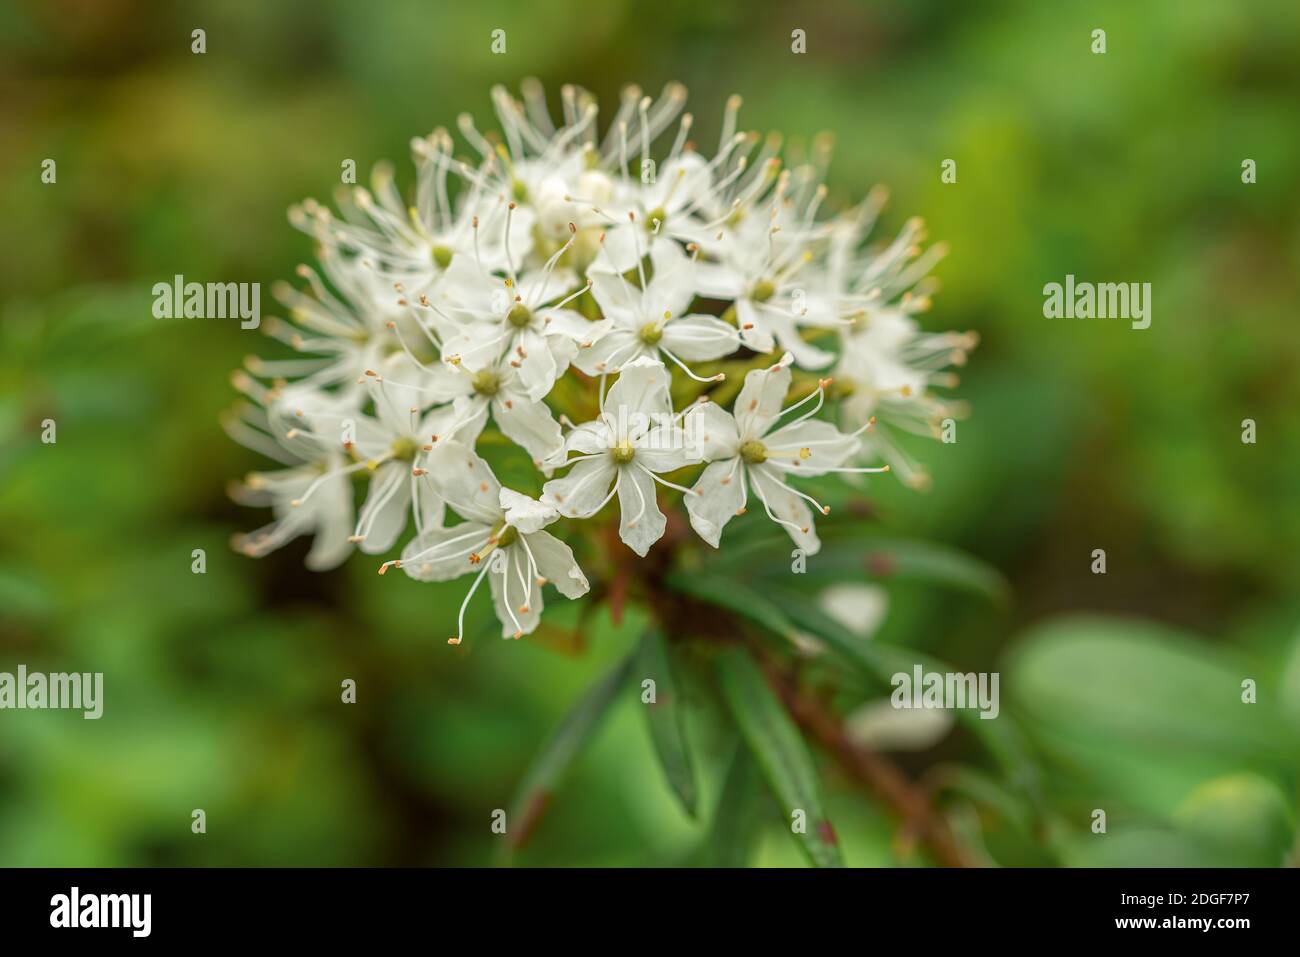 Labrador tea white flowers in the green spring forest Stock Photo